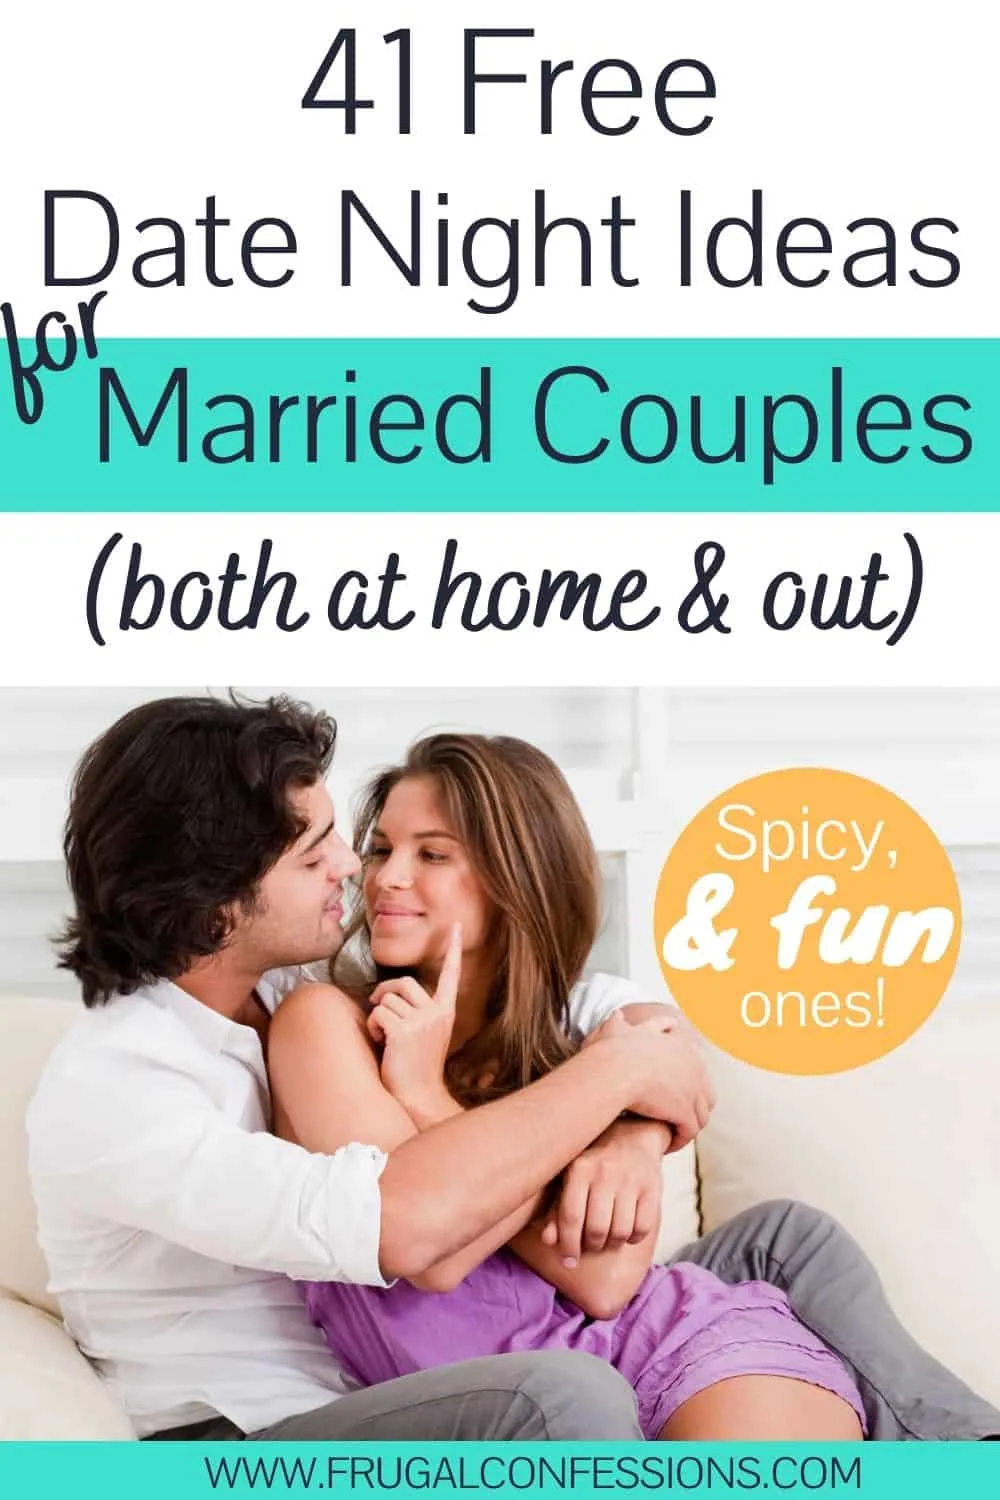 41 Free Date Ideas for Married Couples At Home (Romantic + Fun) photo